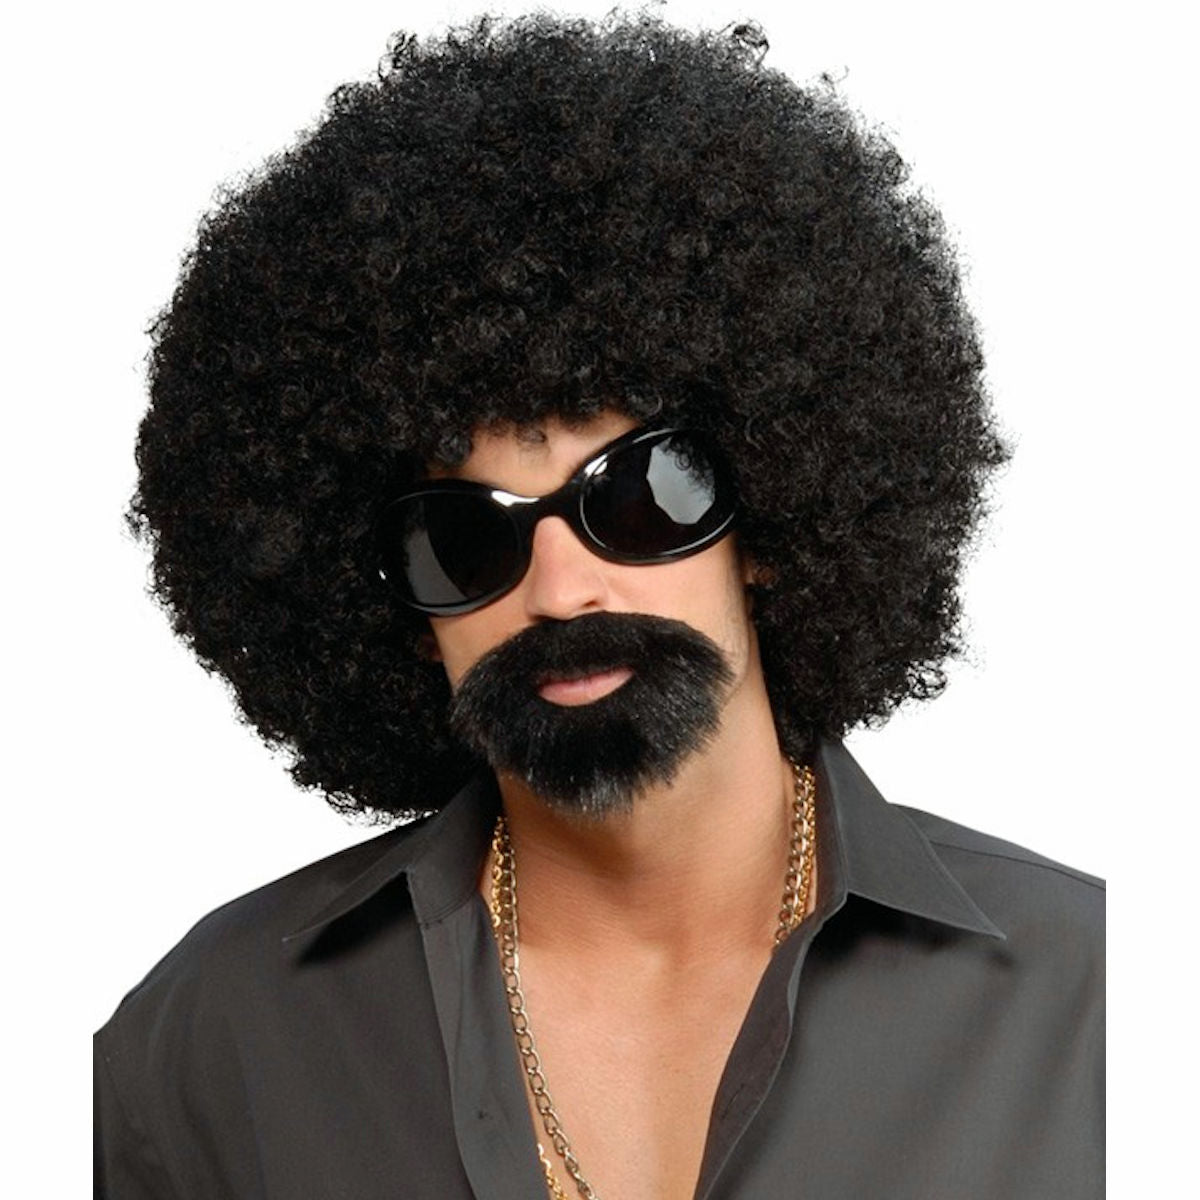 70's Afro Man Instant Costume Kit Wig with Glasses and beard/moustache